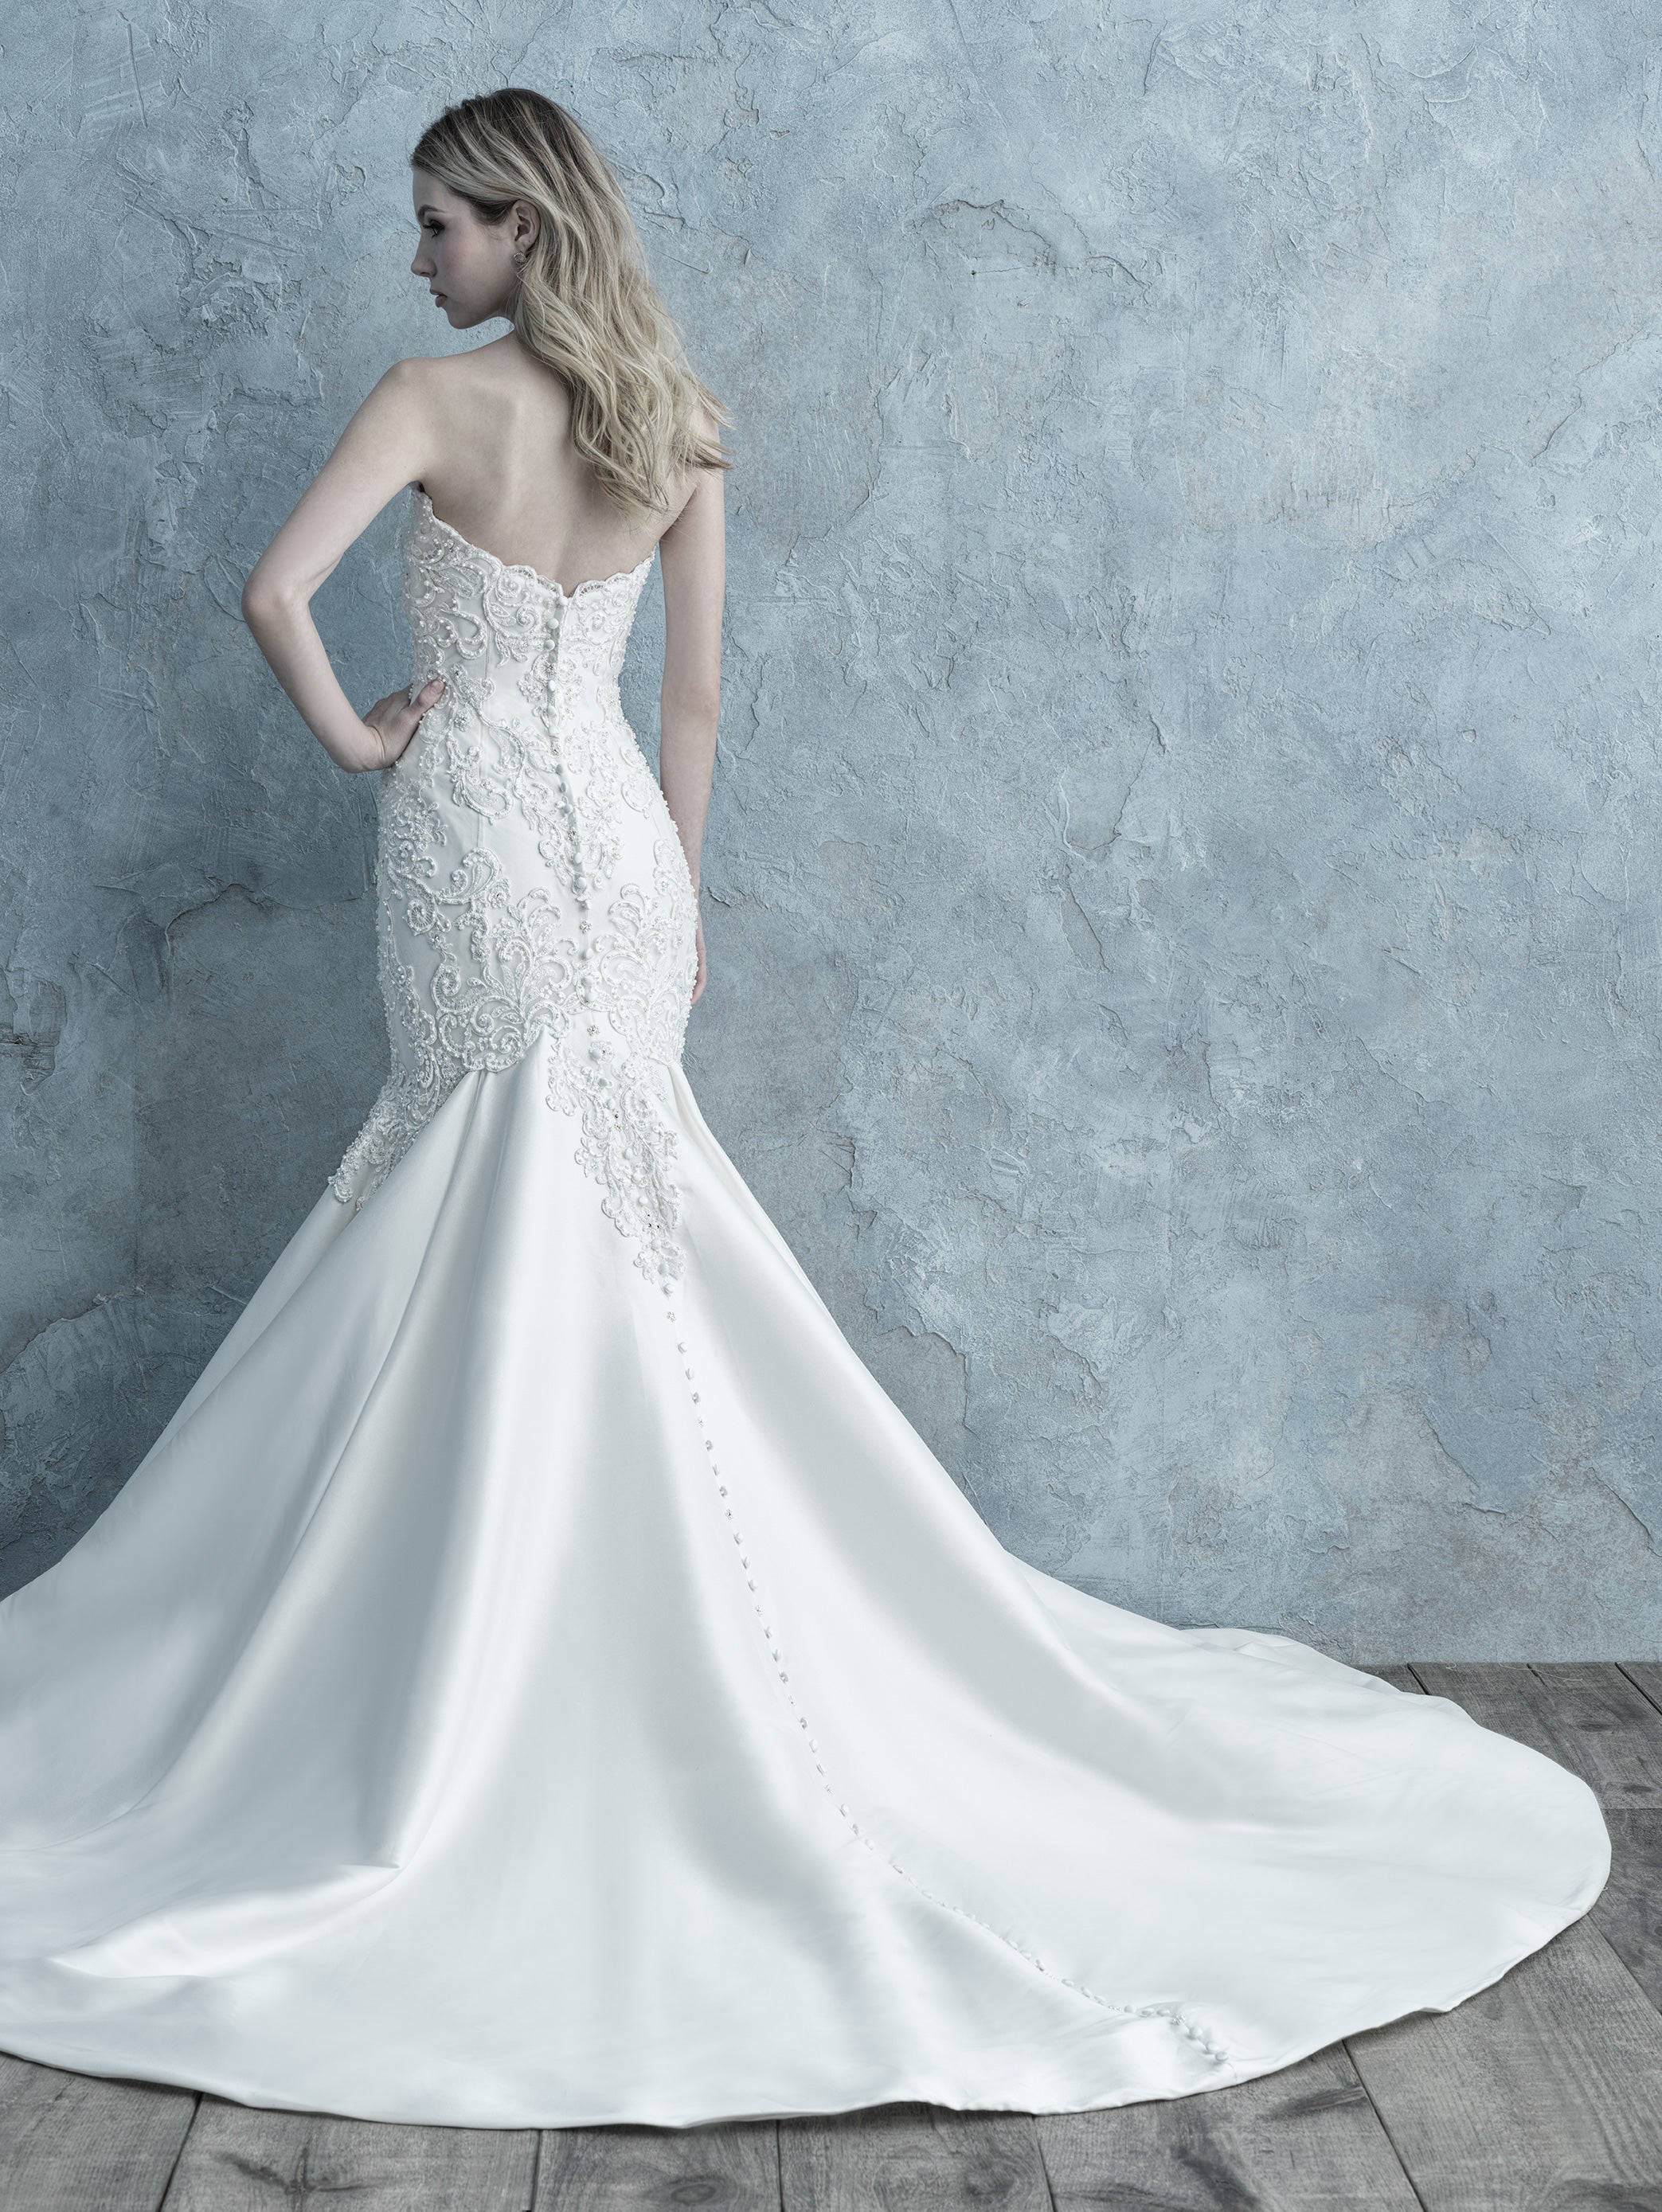 Beaded Lace Appliqué Sweetheart Strapless Fit And Flare Wedding Dress | Kleinfeld Bridal